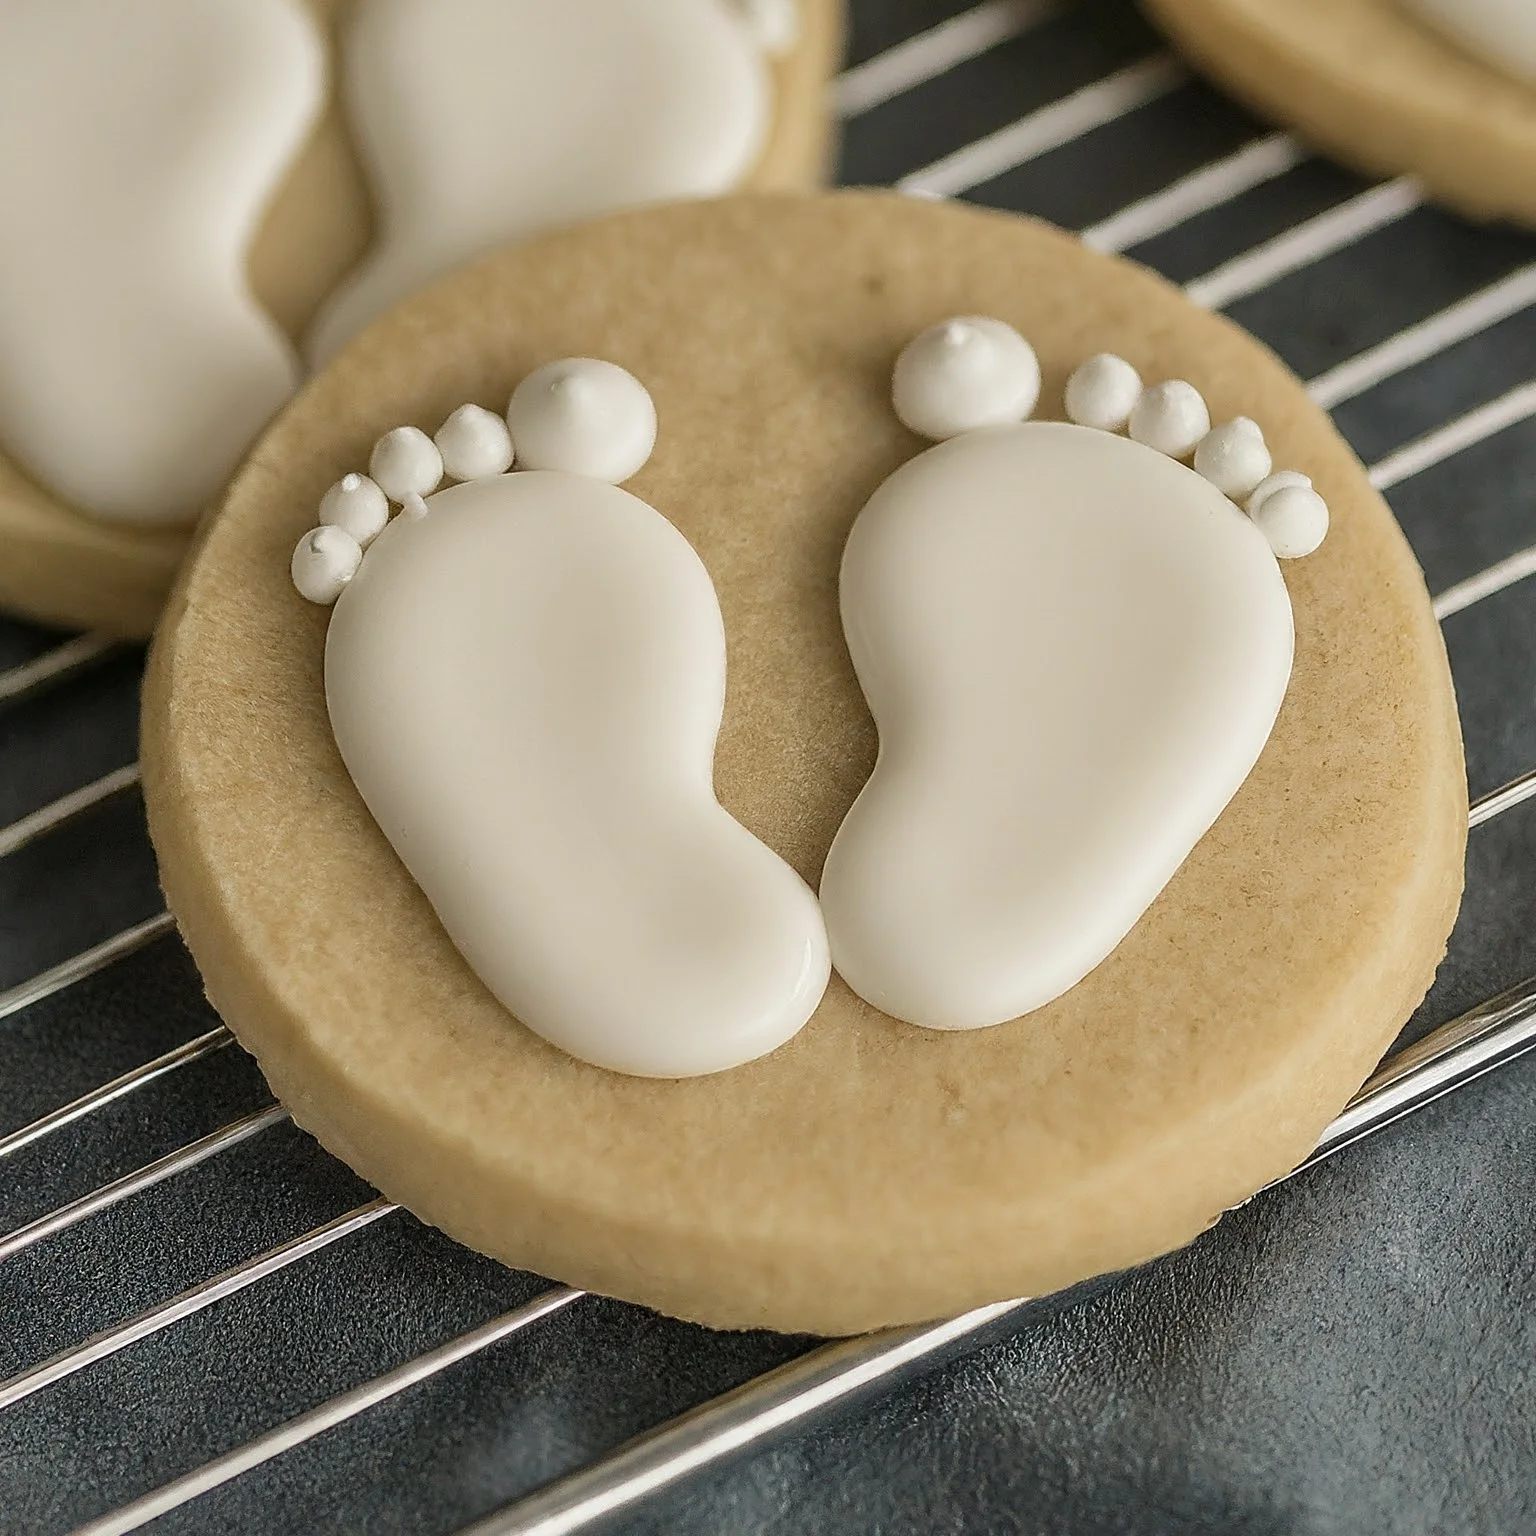 Baby Feet Cut-Out Cookies: Easy and Adorable